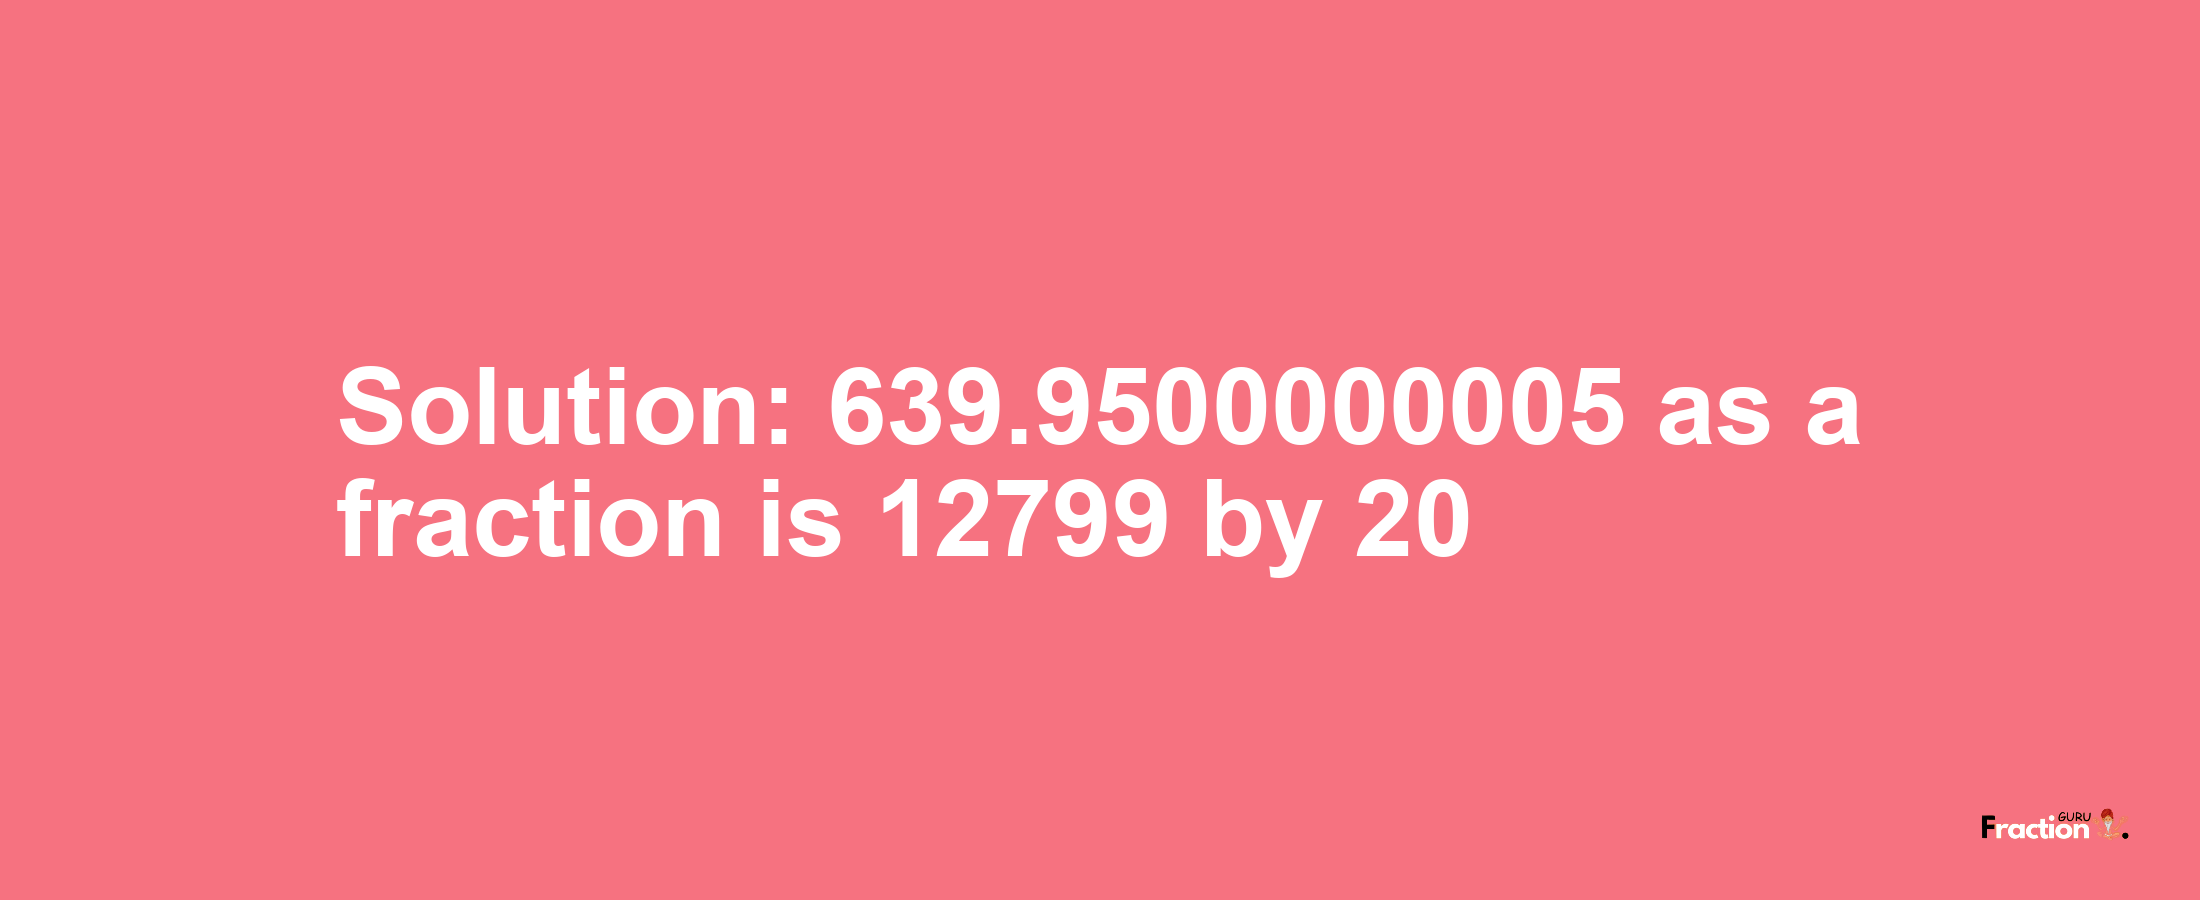 Solution:639.9500000005 as a fraction is 12799/20